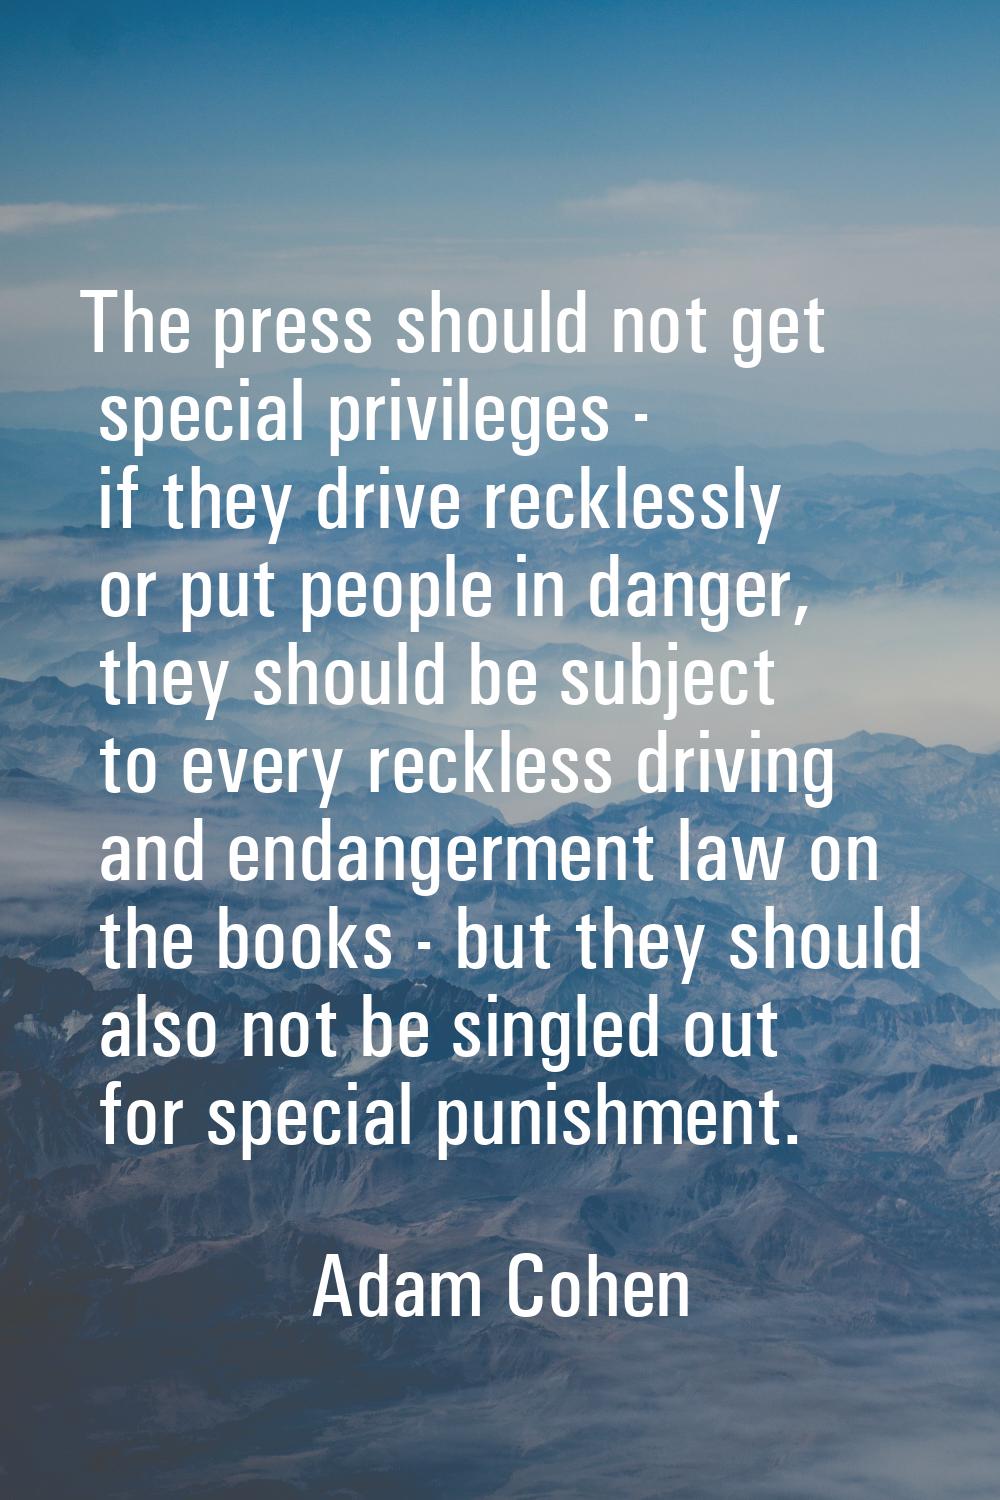 The press should not get special privileges - if they drive recklessly or put people in danger, the